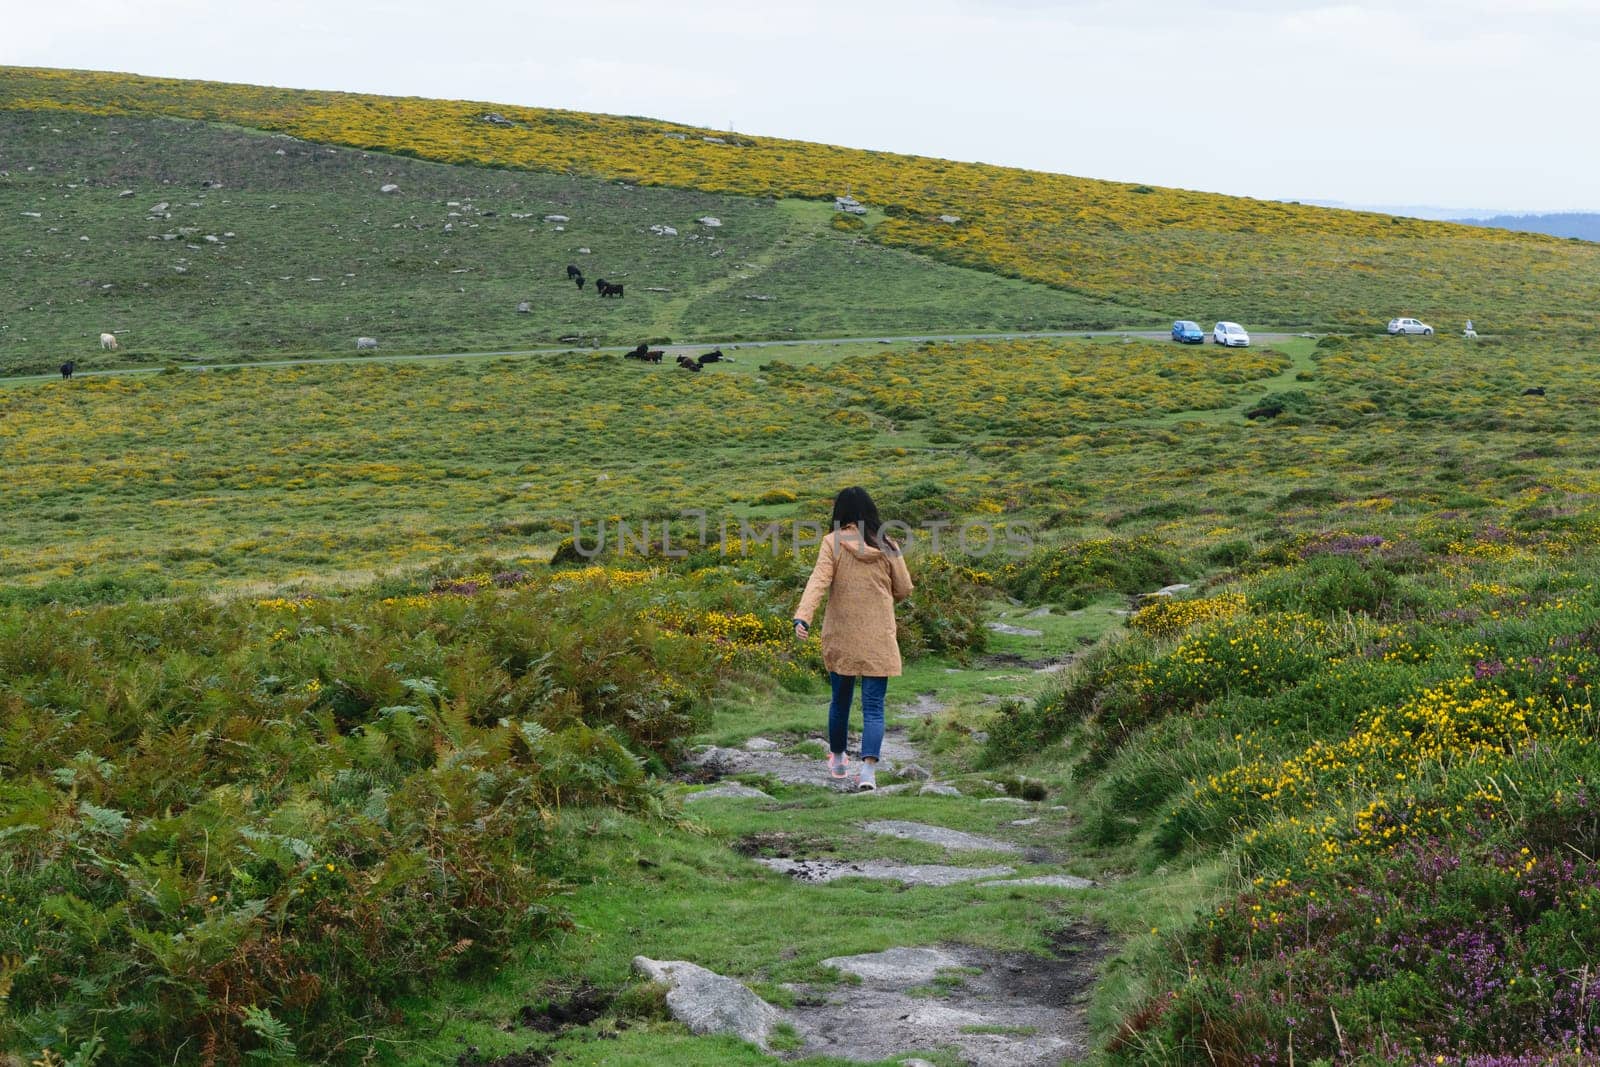 A person in a brown coat walking on a trail through a grassy and hilly landscape with scattered yellow heather and some grazing cows in the distance. There are a few parked cars visible on a road in the background.